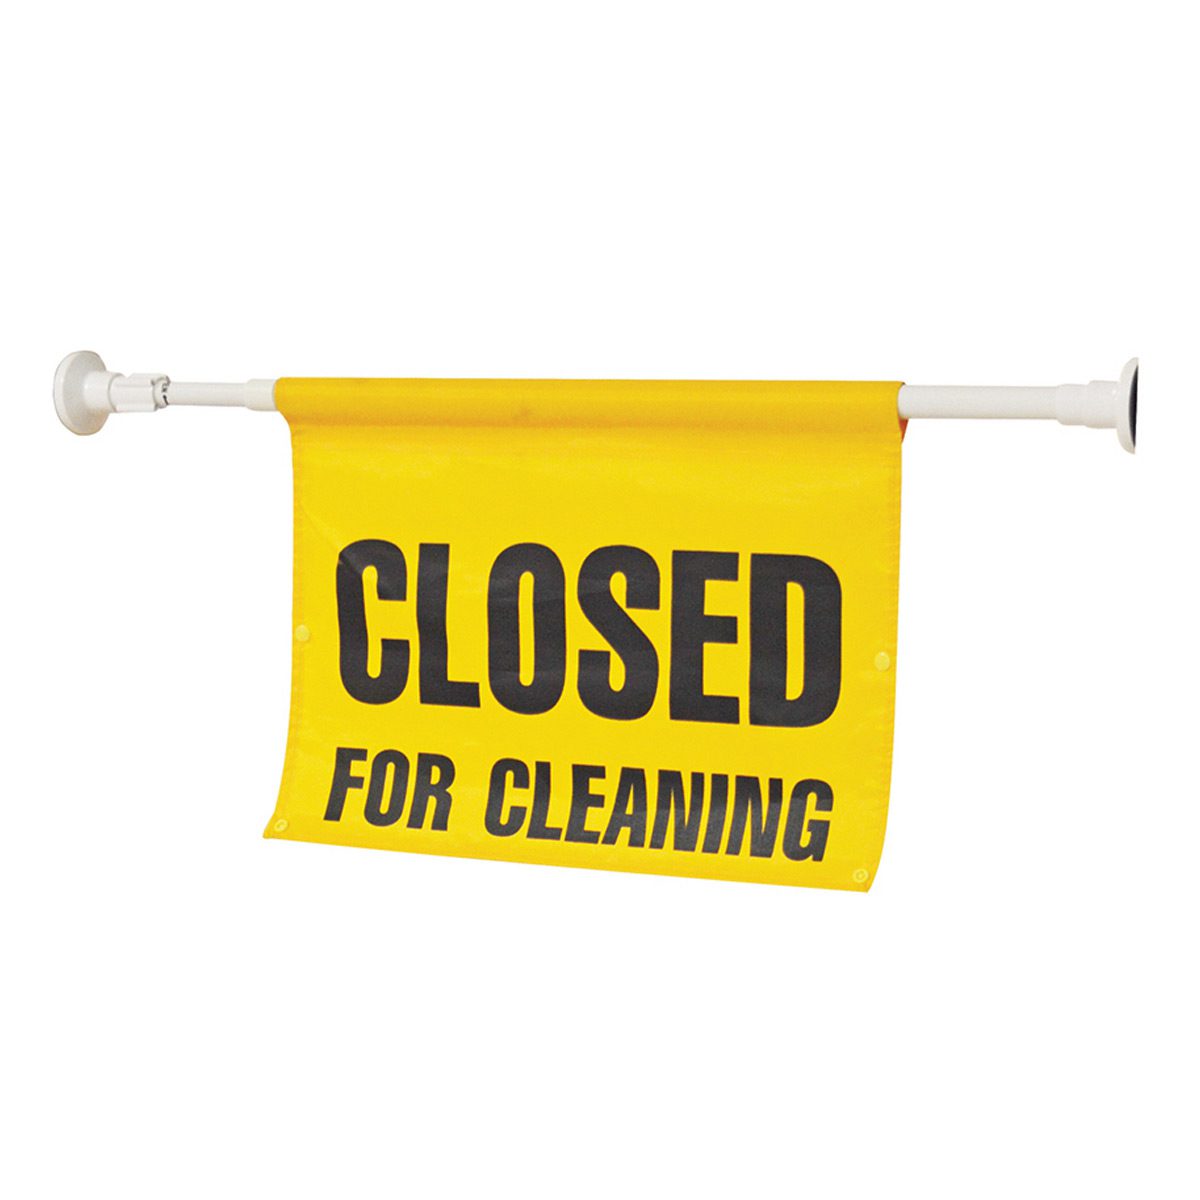 cleaning-equipment-brushware-closed-for-cleaning-safety-pole-sign-complete-vjs-distributors-BSAPO917